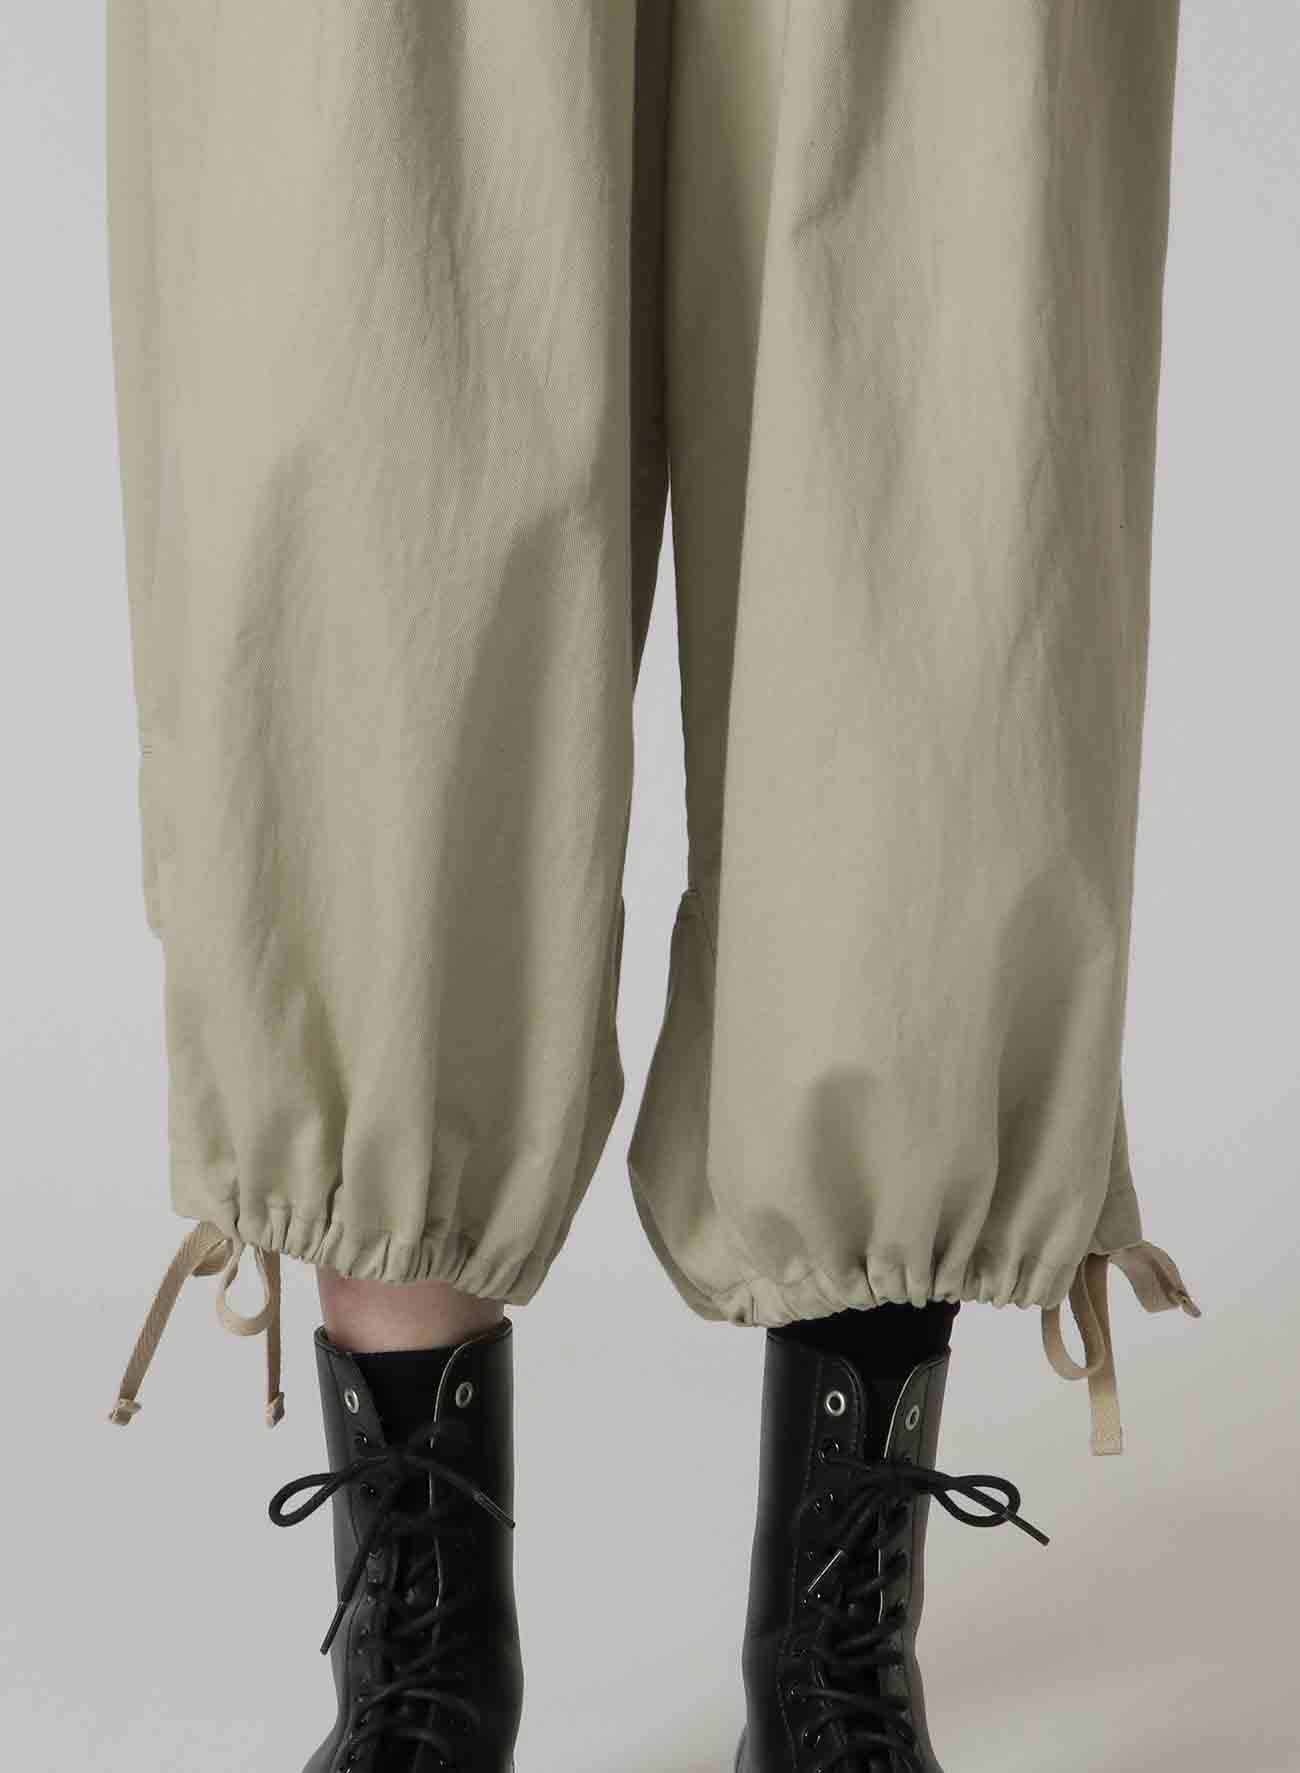 [Y's BORN PRODUCT]COTTON TWILL BACK TUCK PANTS